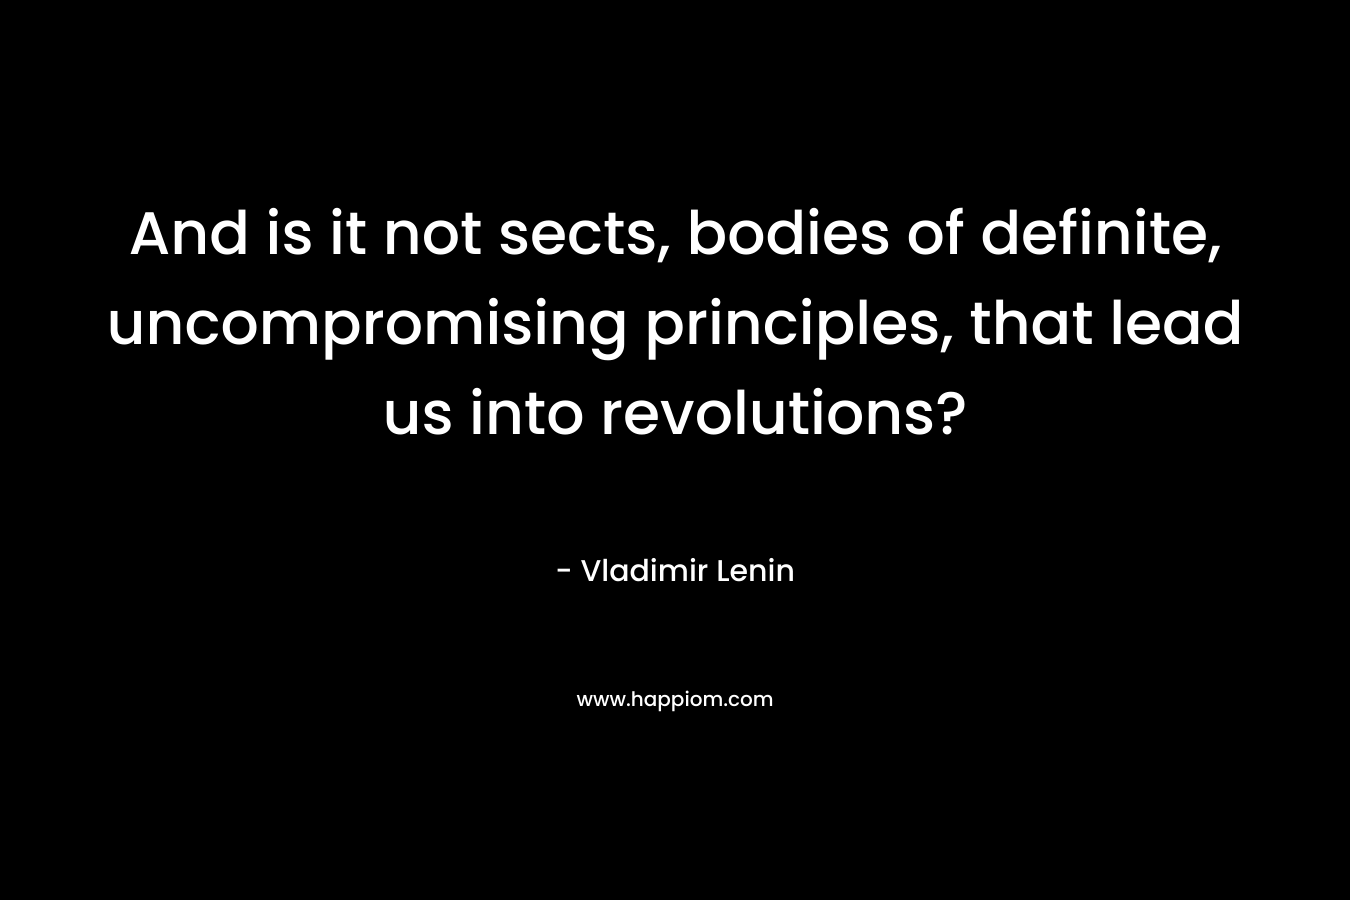 And is it not sects, bodies of definite, uncompromising principles, that lead us into revolutions? – Vladimir Lenin